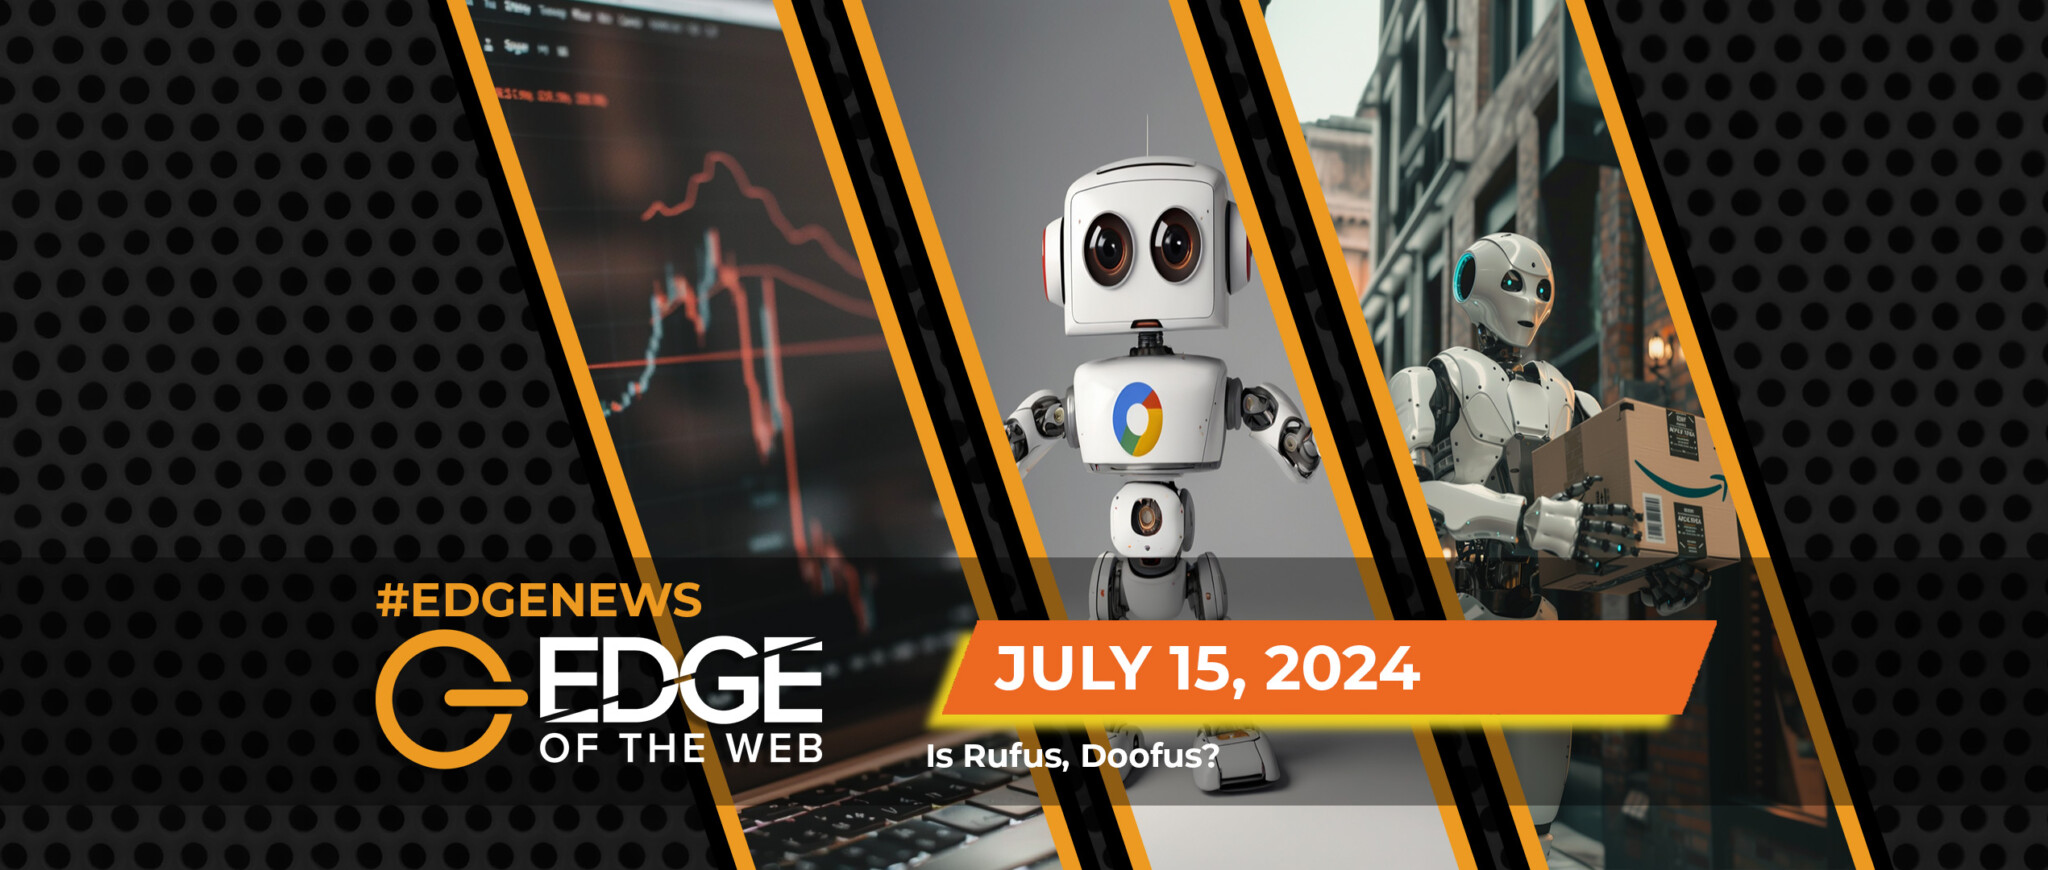 698 | News from the EDGE | Week of 7.15.2024